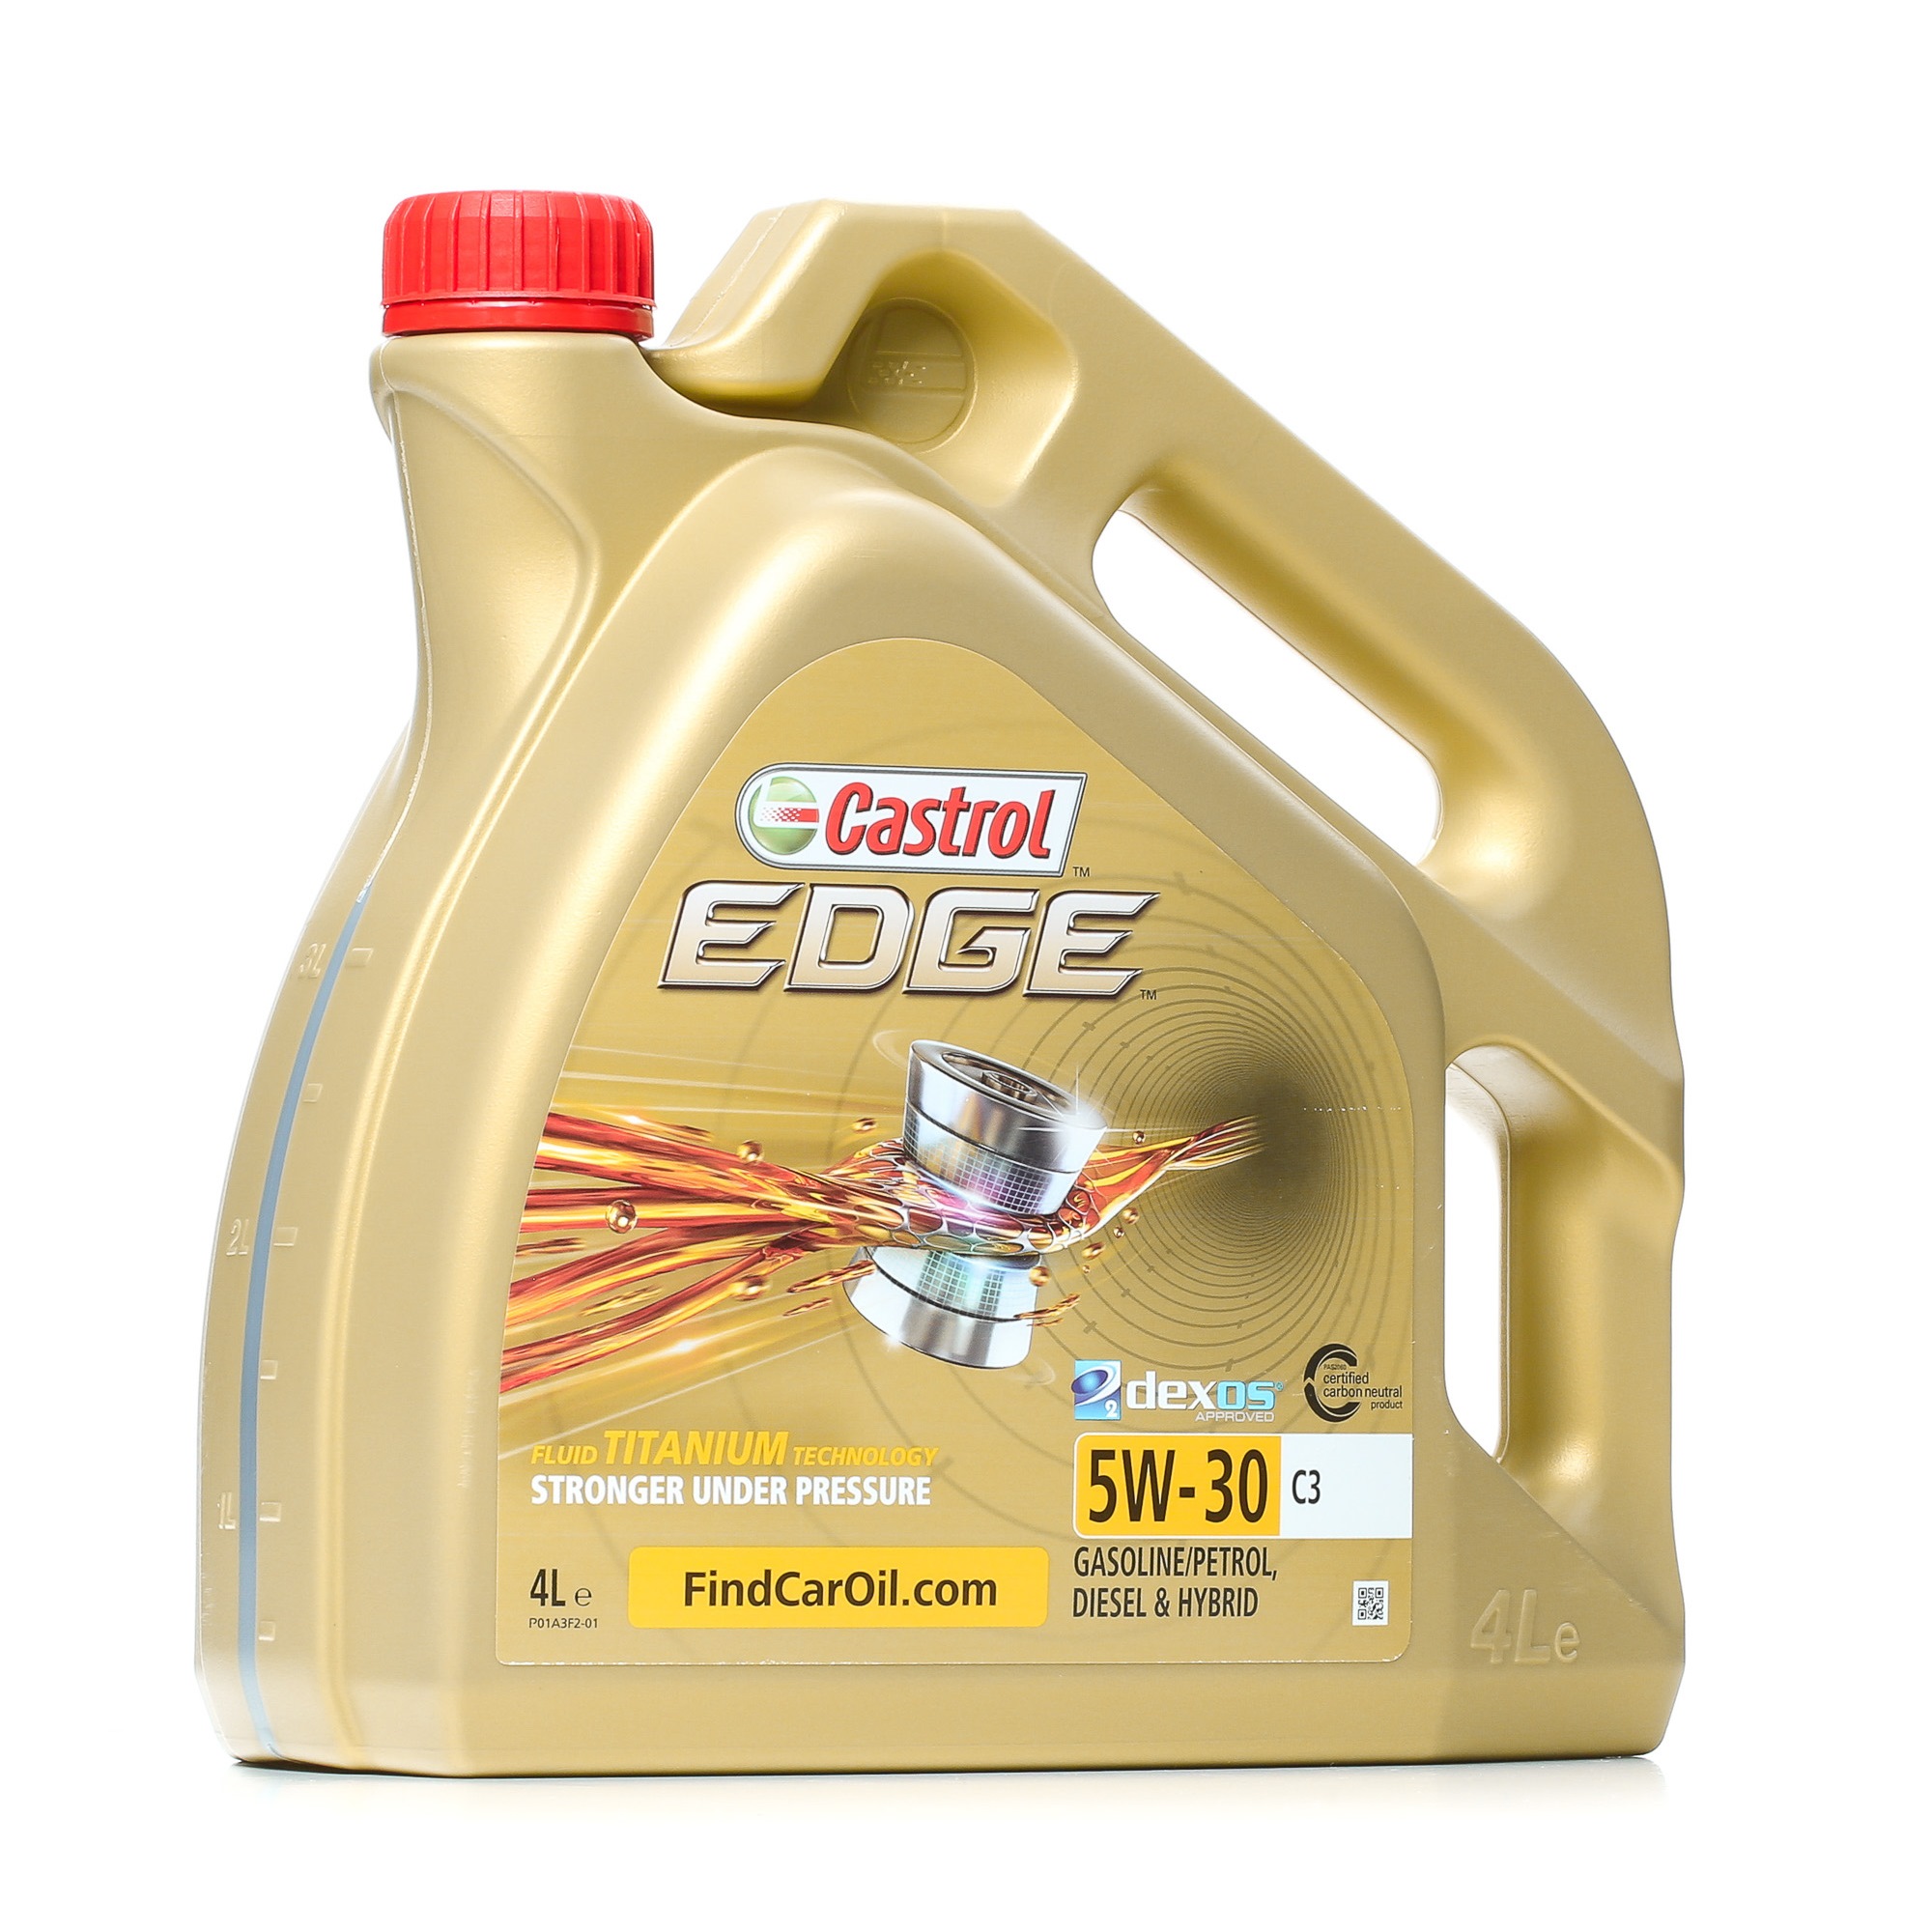 Volvo Engine oil CASTROL 5W-30 at a good price